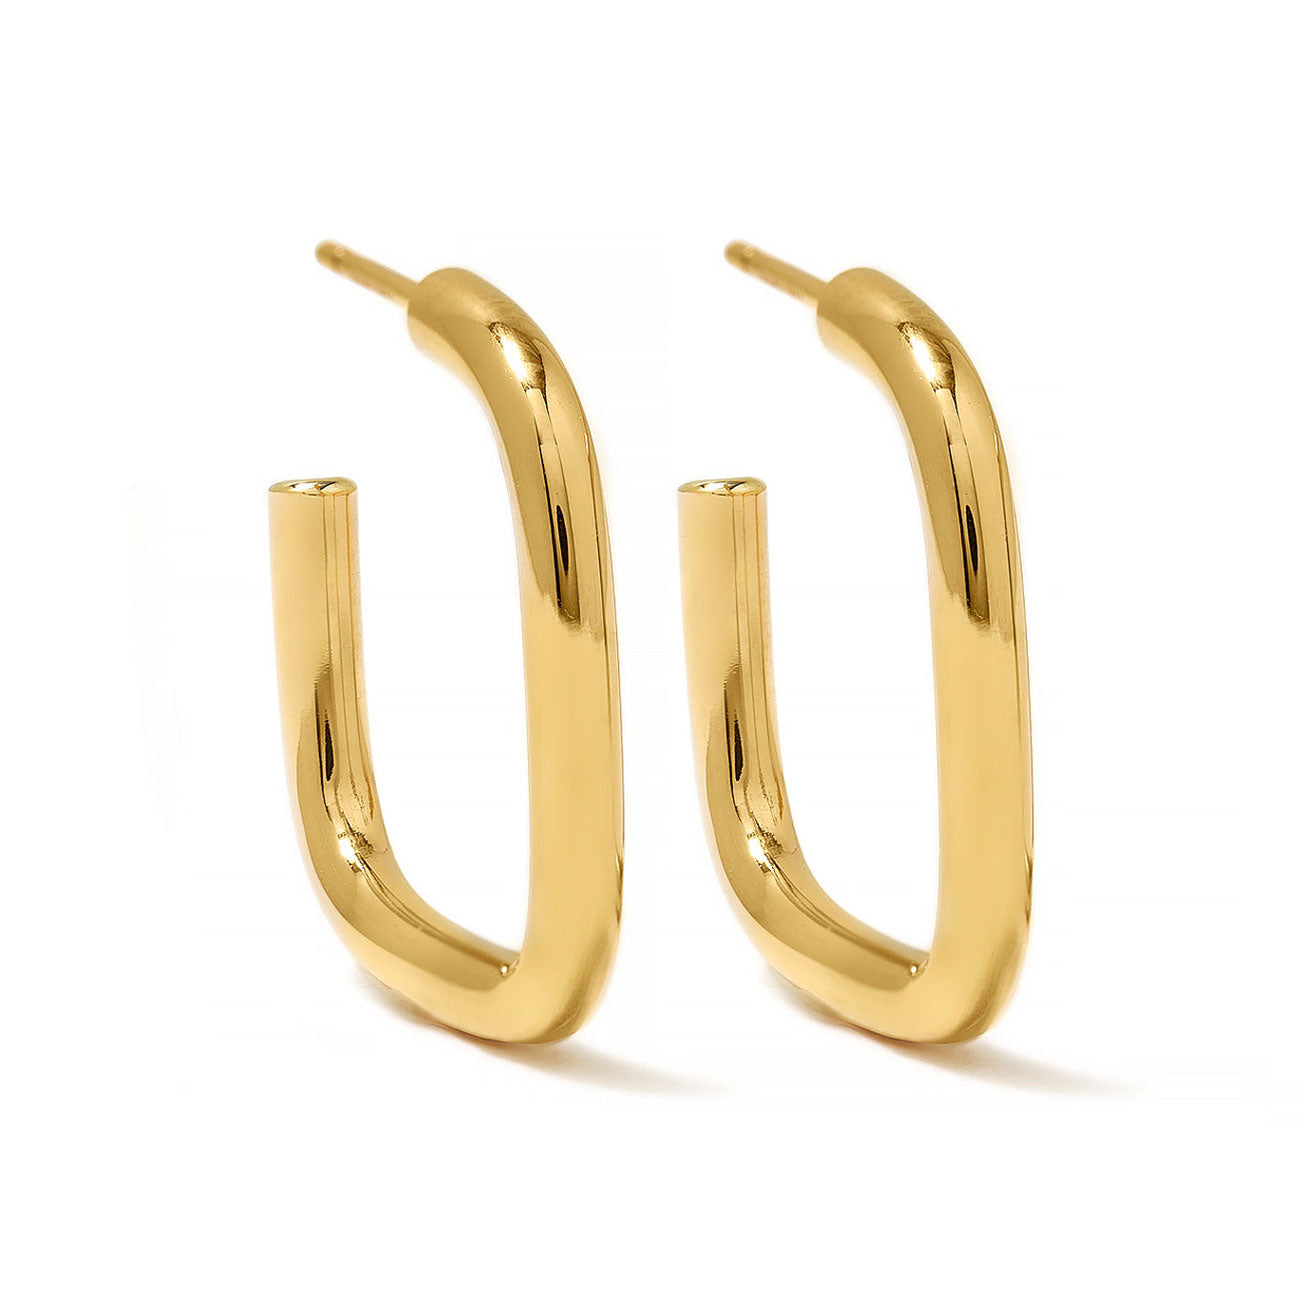 Square Hoops Earring Yellow Gold Plated Personalized Gift Earring For Her - Jay Amar Gems